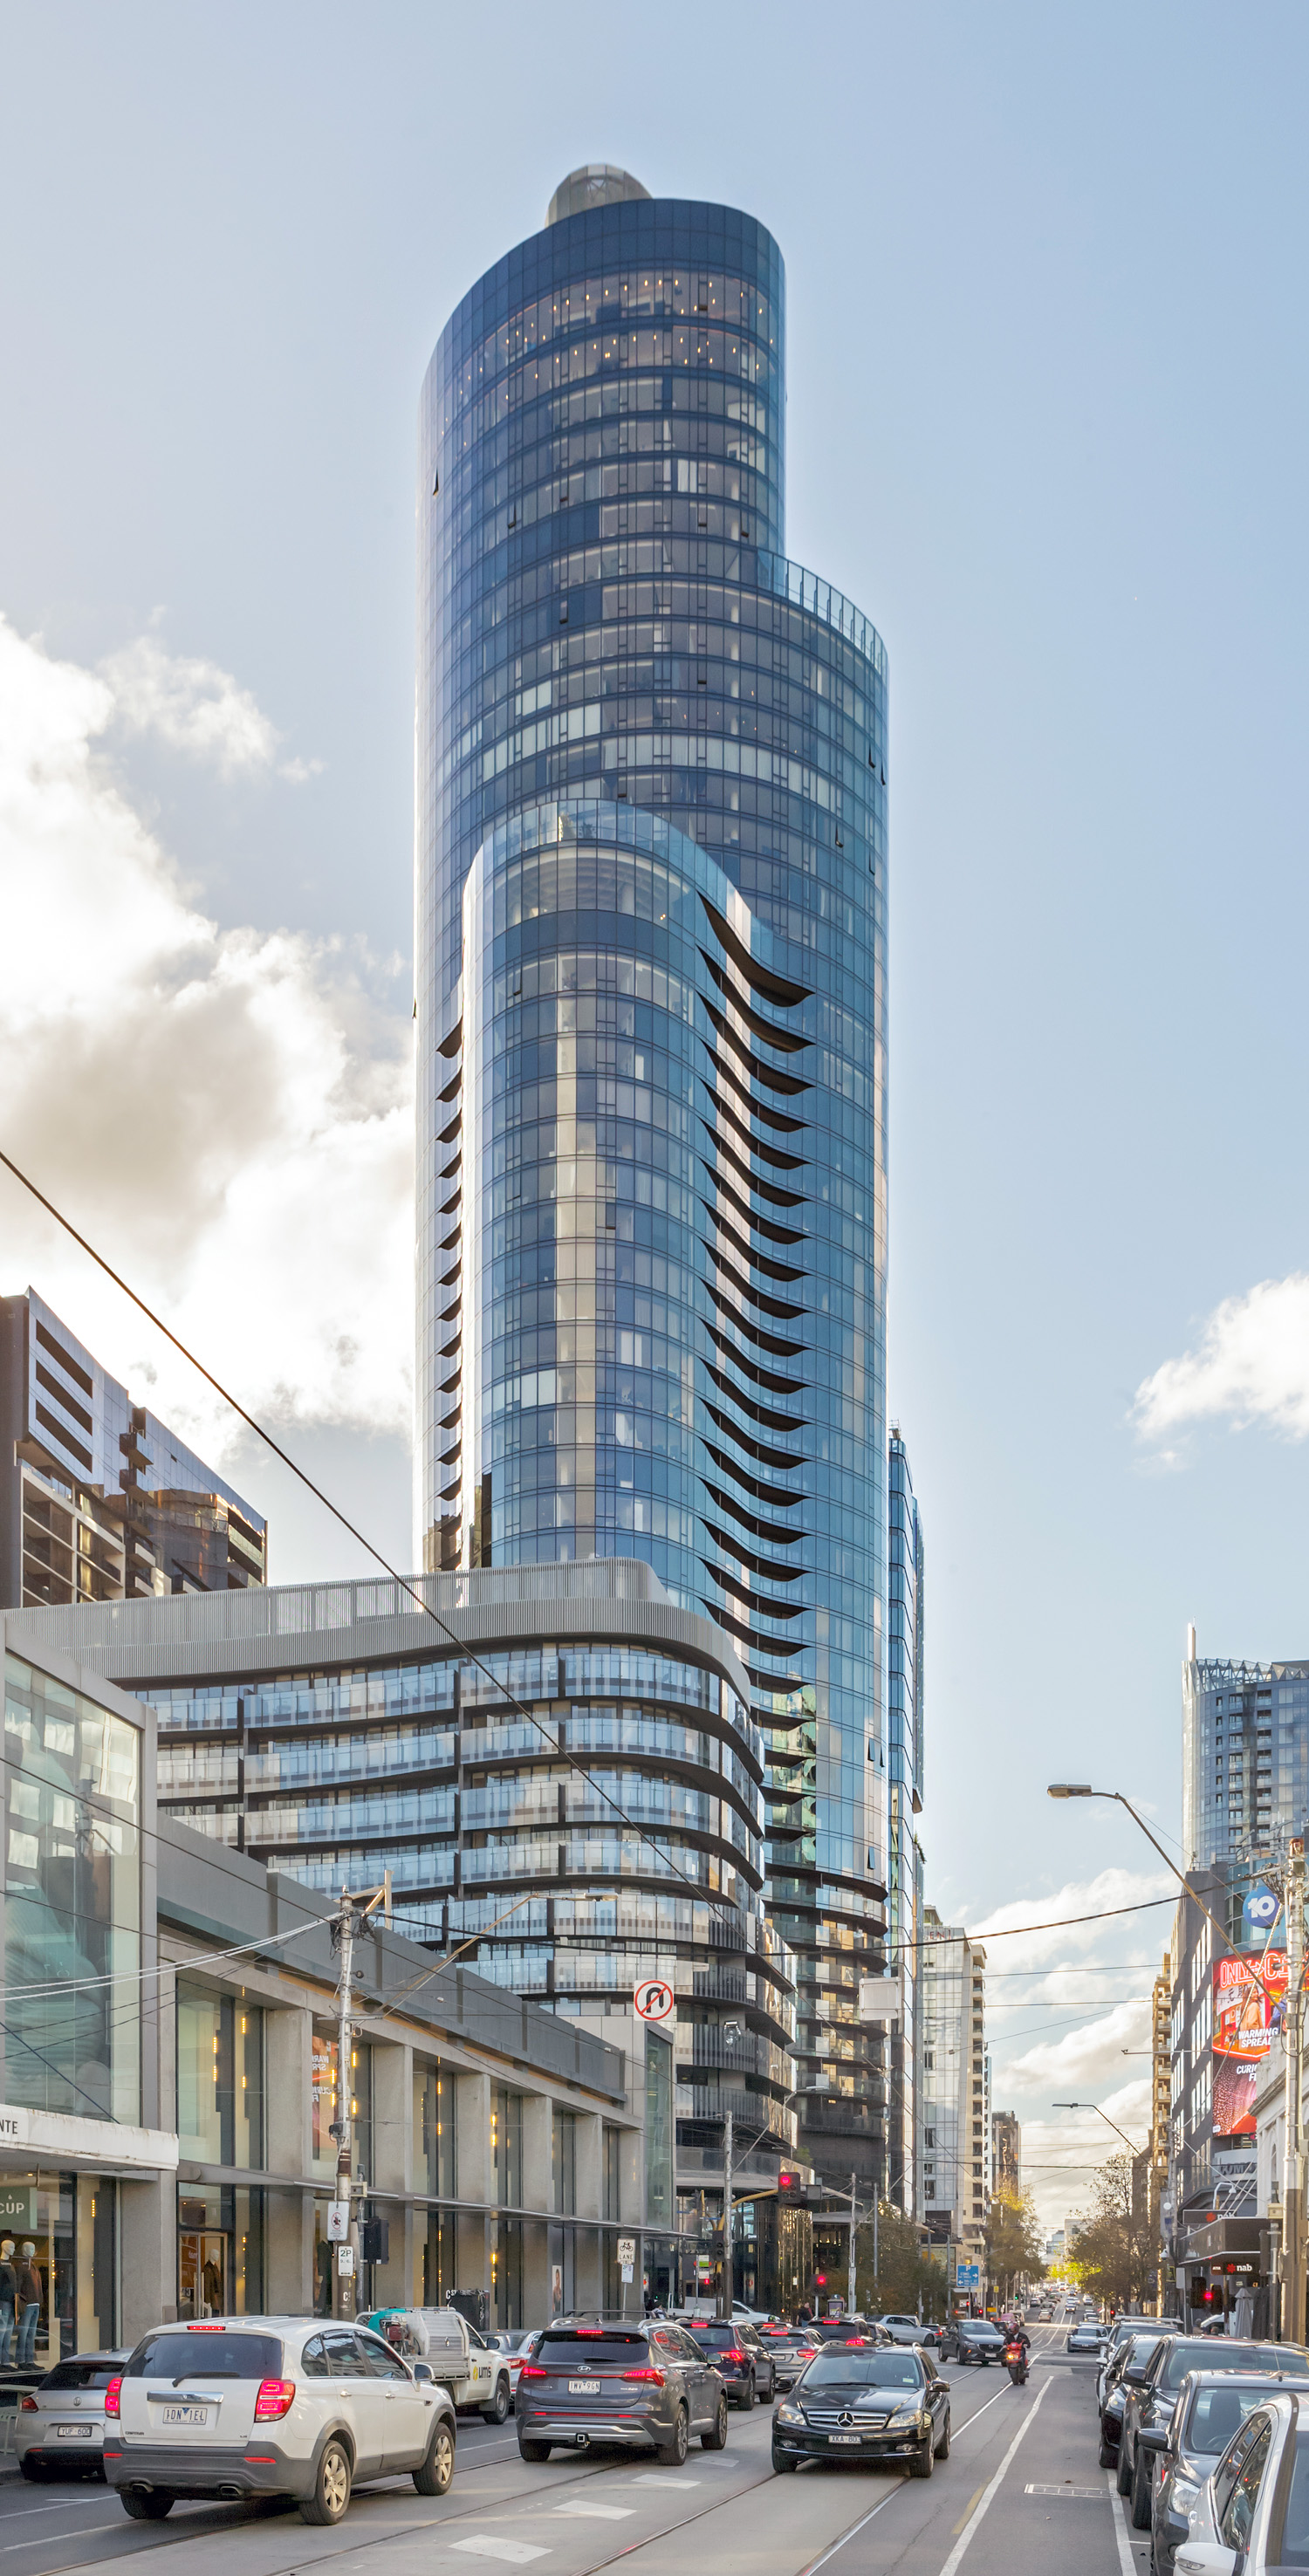 Chapel Tower, Melbourne - View from the south. © Mathias Beinling